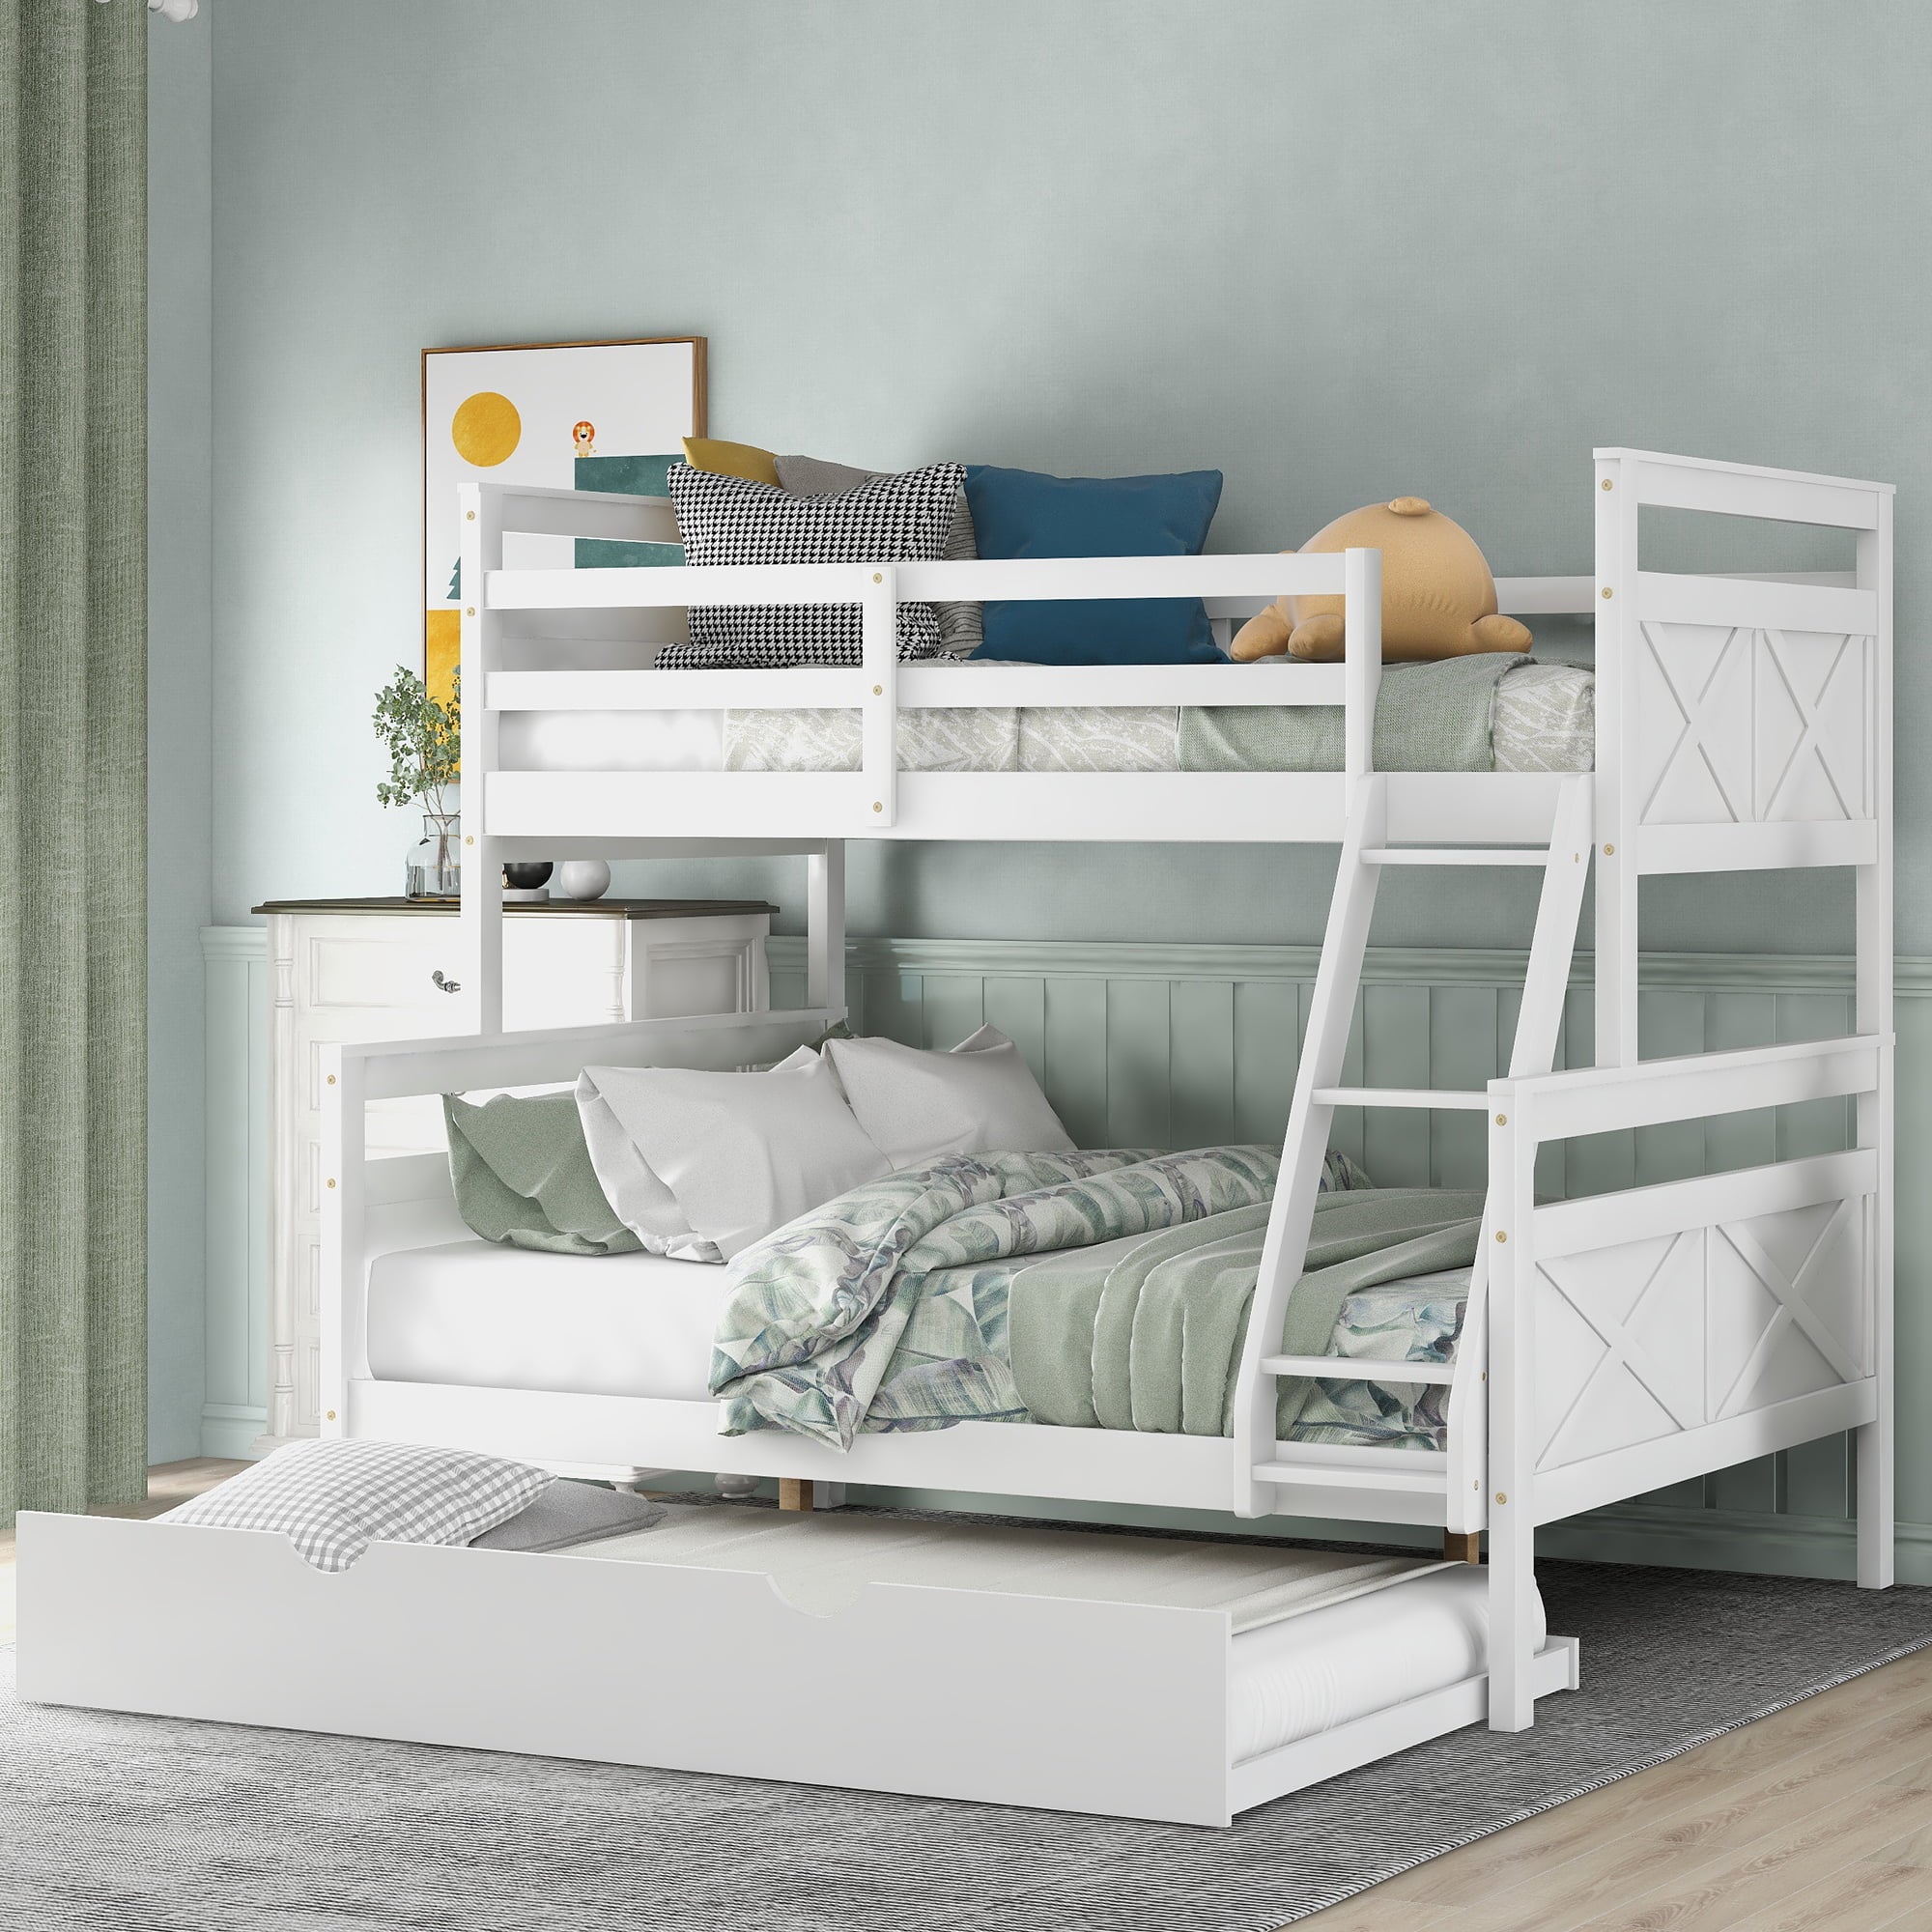 Euroco Wood Twin over Full Bunk Bed with Trundle for Kids & Adults for Bedrooms, White